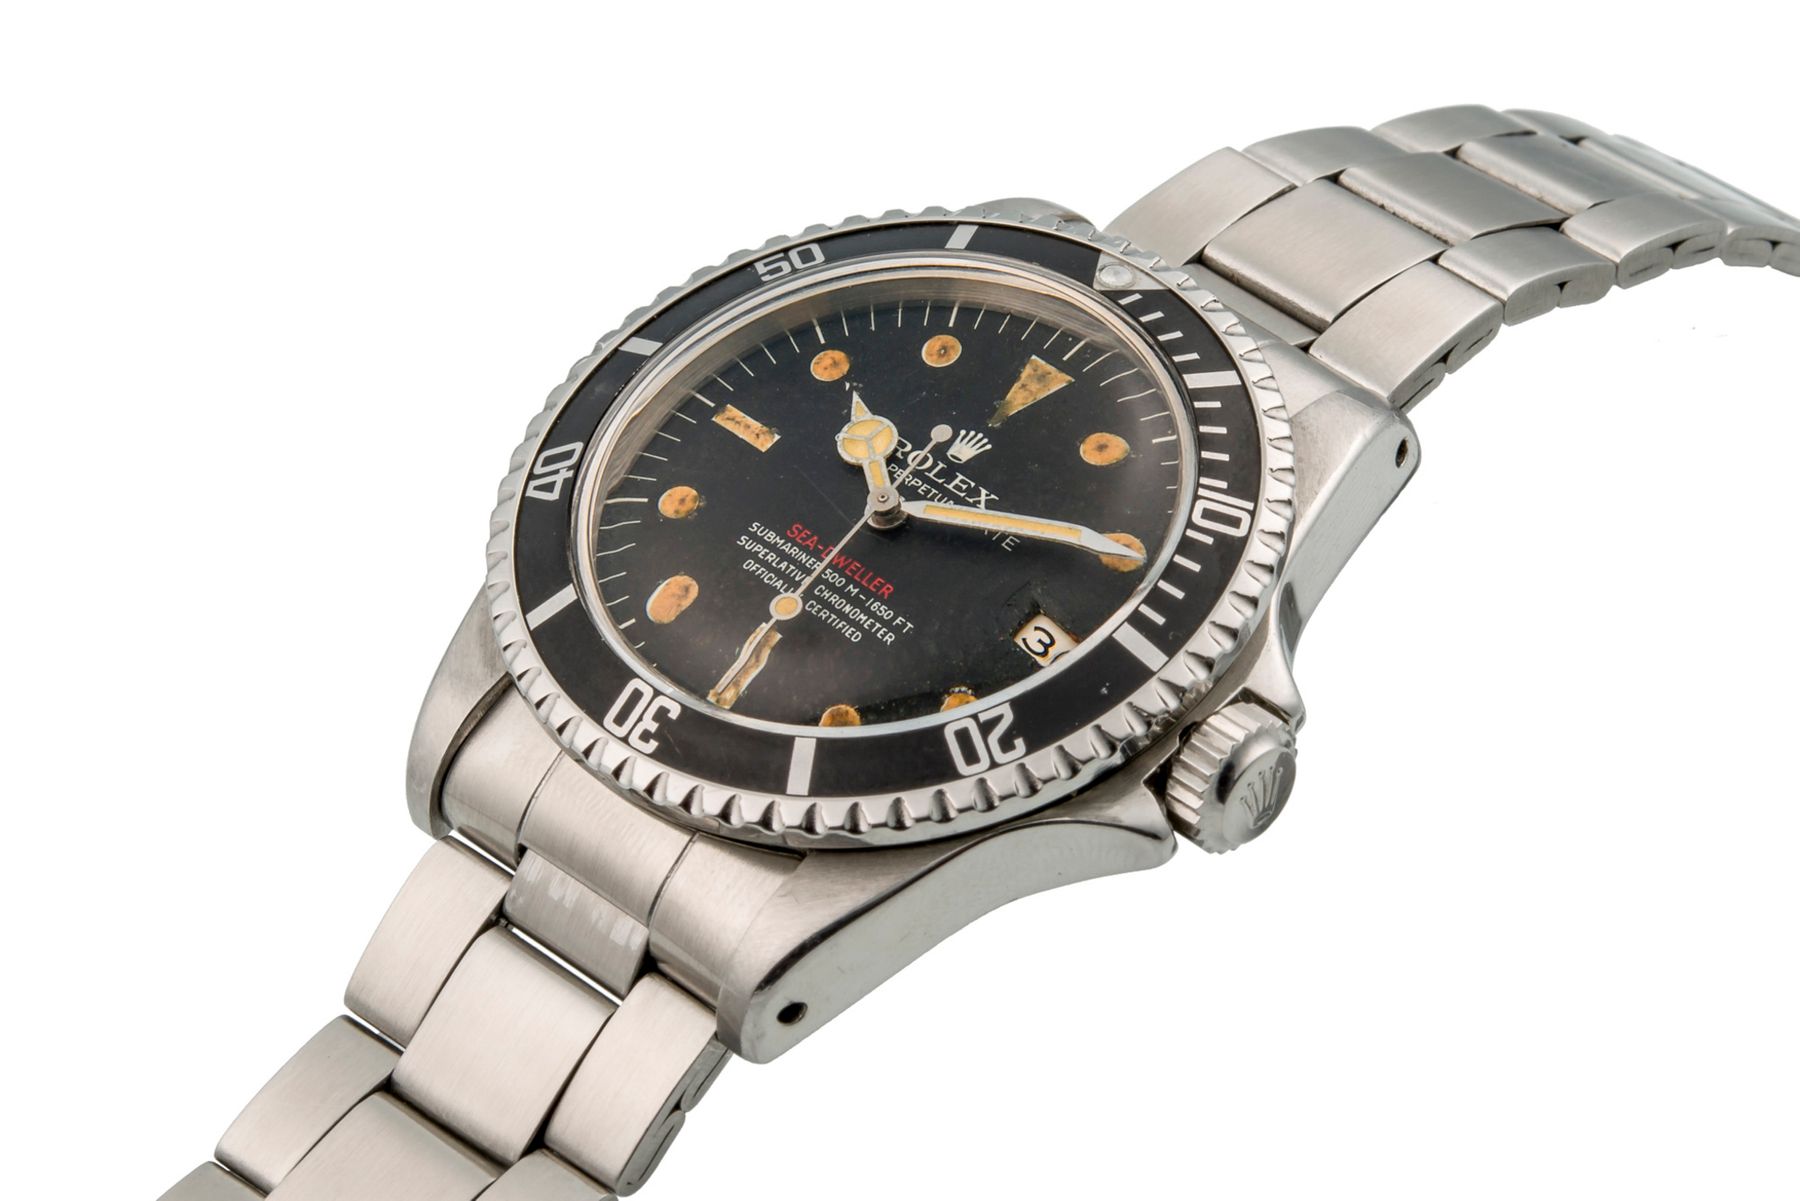 What Makes The Rolex Single Red So Special? -